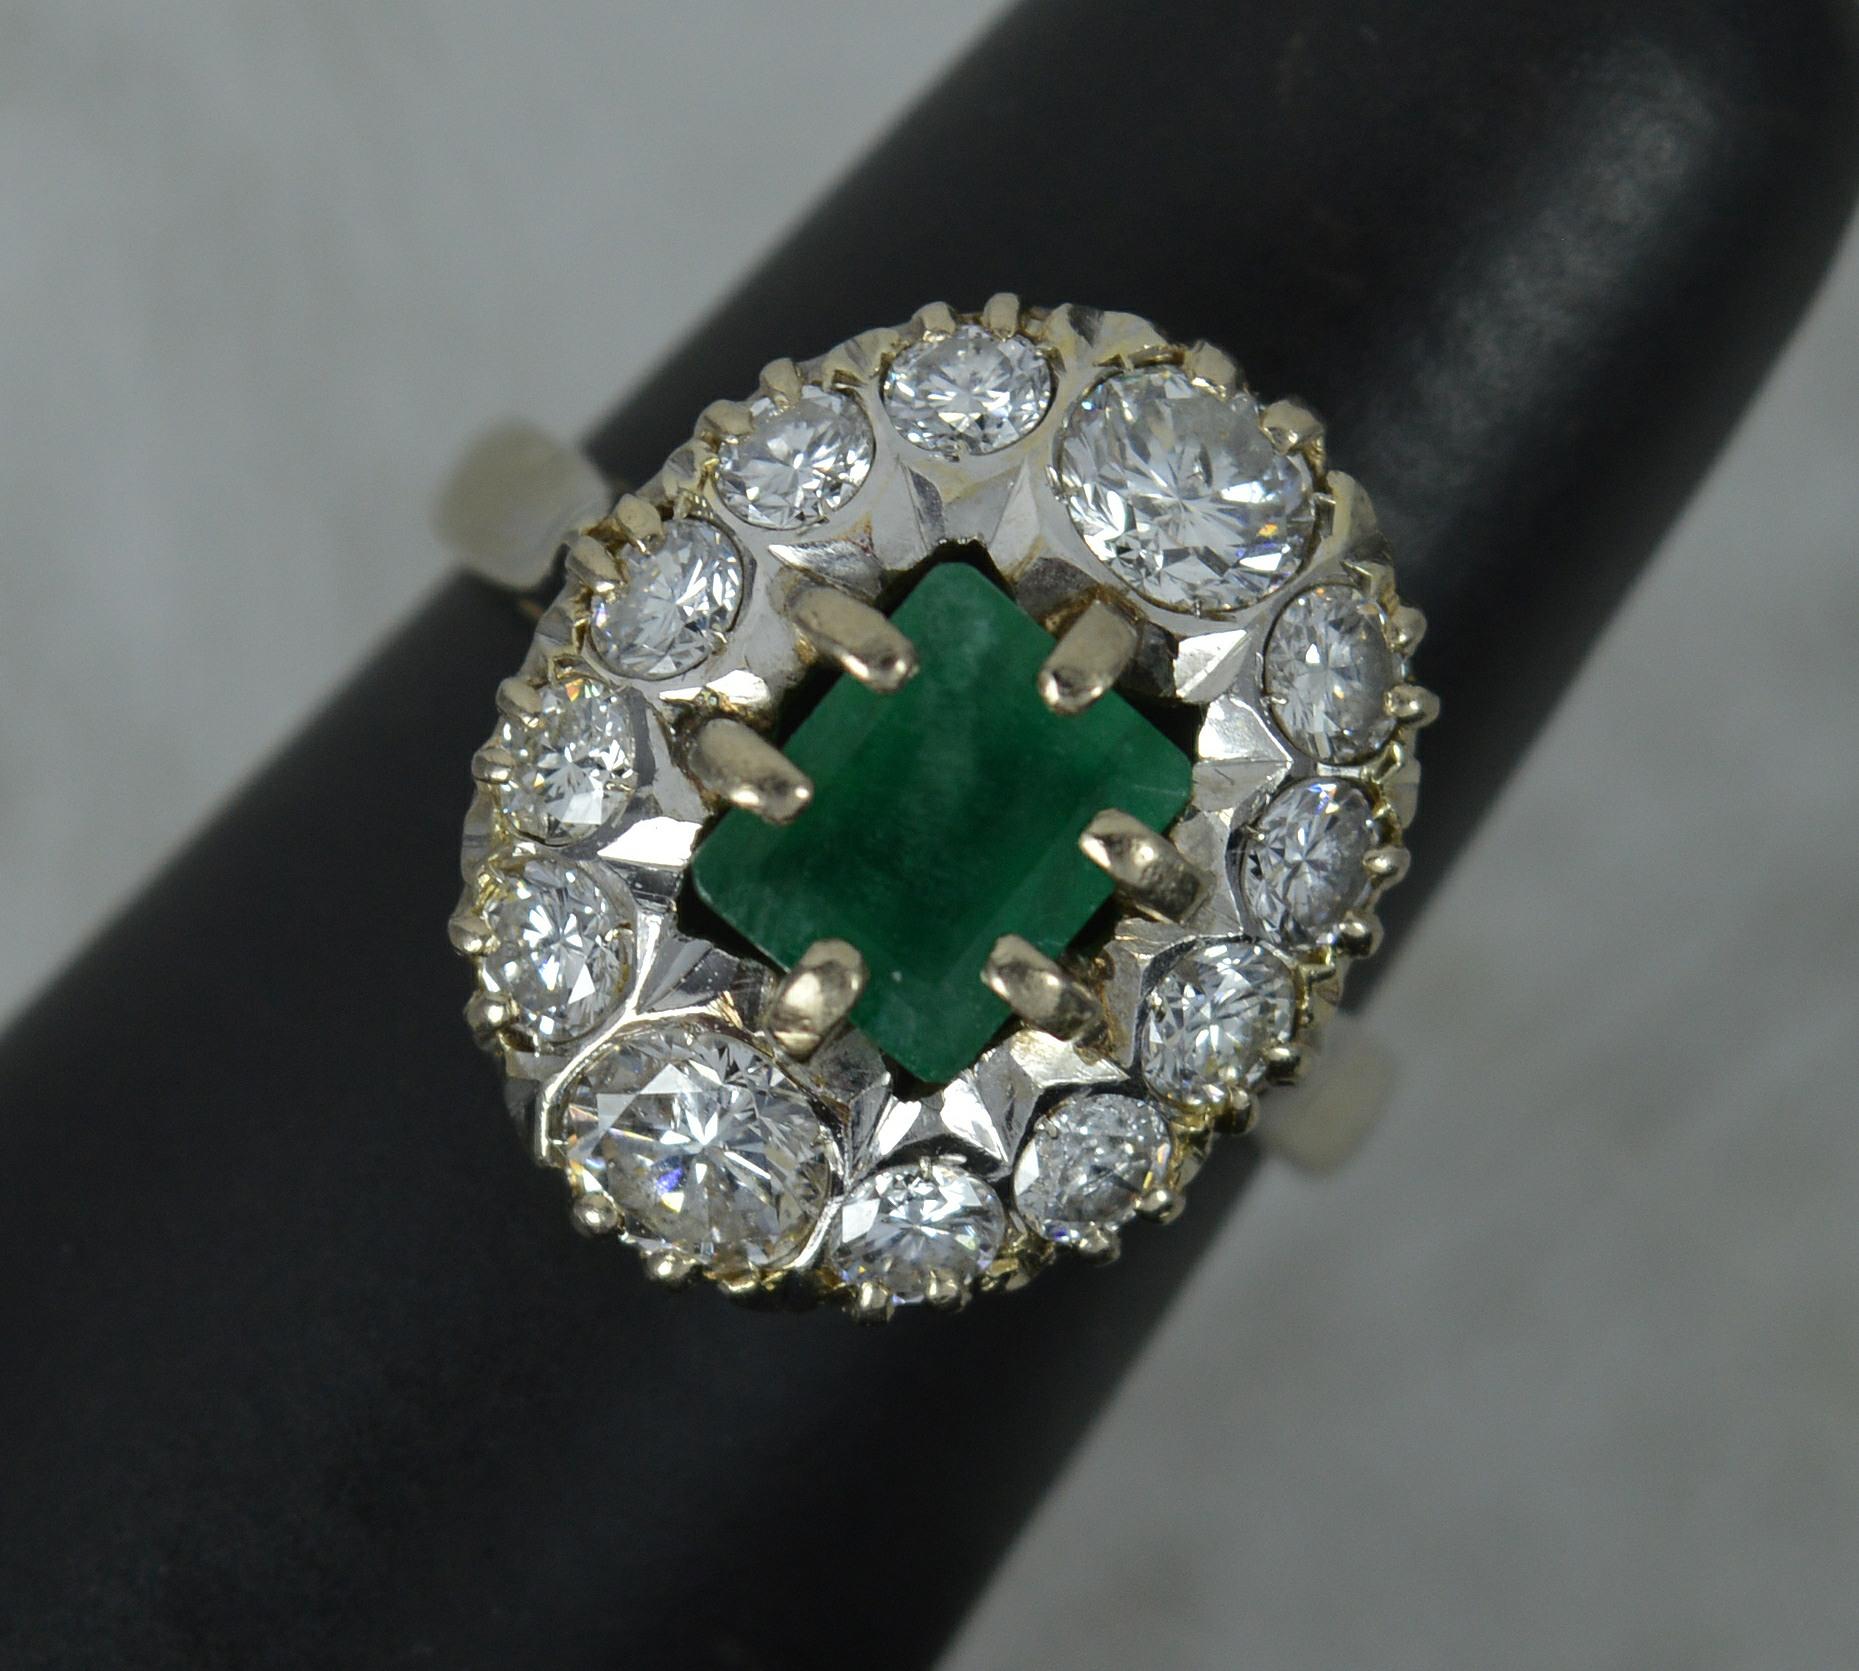 A stunning Emerald and Diamond cluster ring.
Modelled in 18 carat gold throughout.
Designed with a natural emerald to centre, emerald cut, 5.5mm x 6.8mm approx. Surrounding are twelve natural round brilliant cut diamonds to total 1.6 carat. Clean